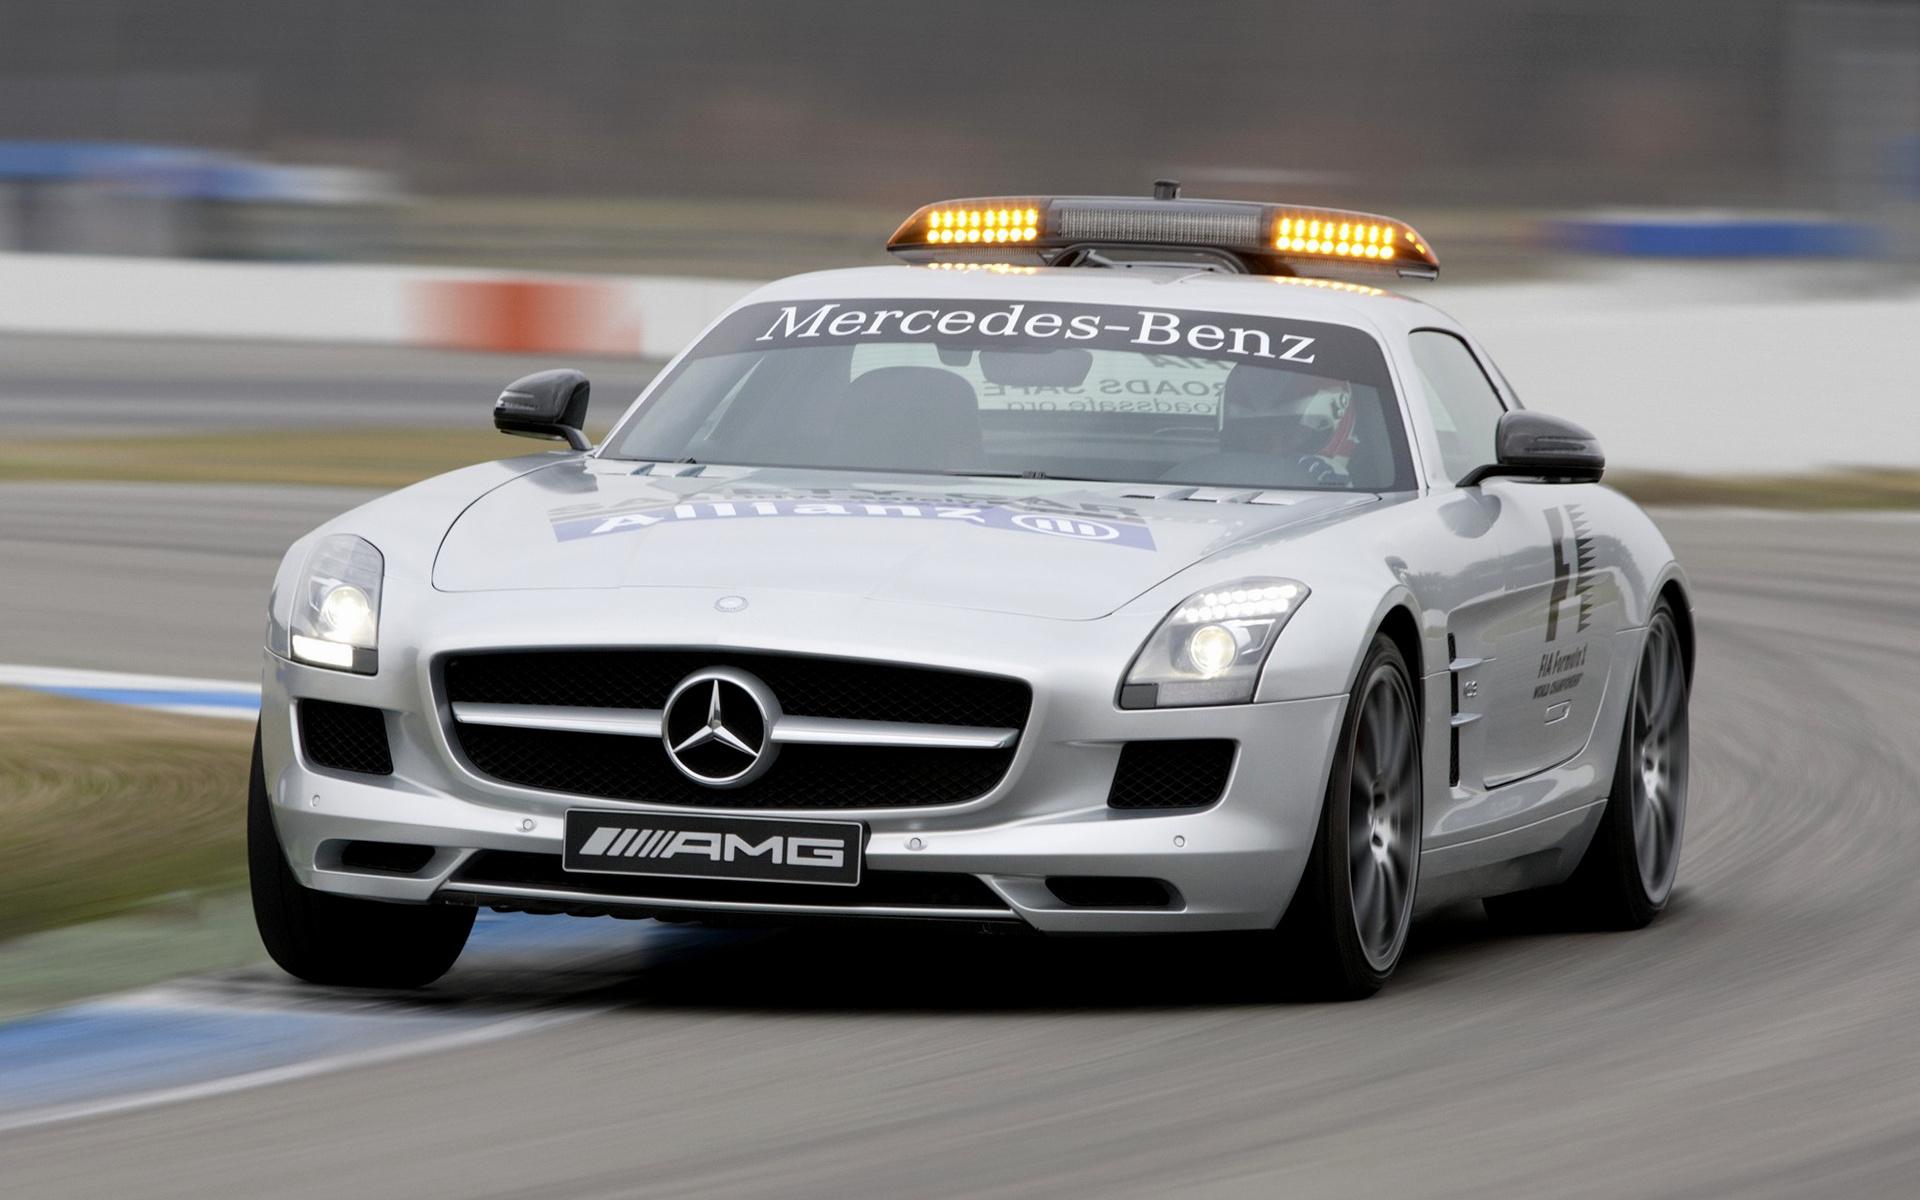 Mercedes Benz SLS AMG F1 Safety Car And HD Image